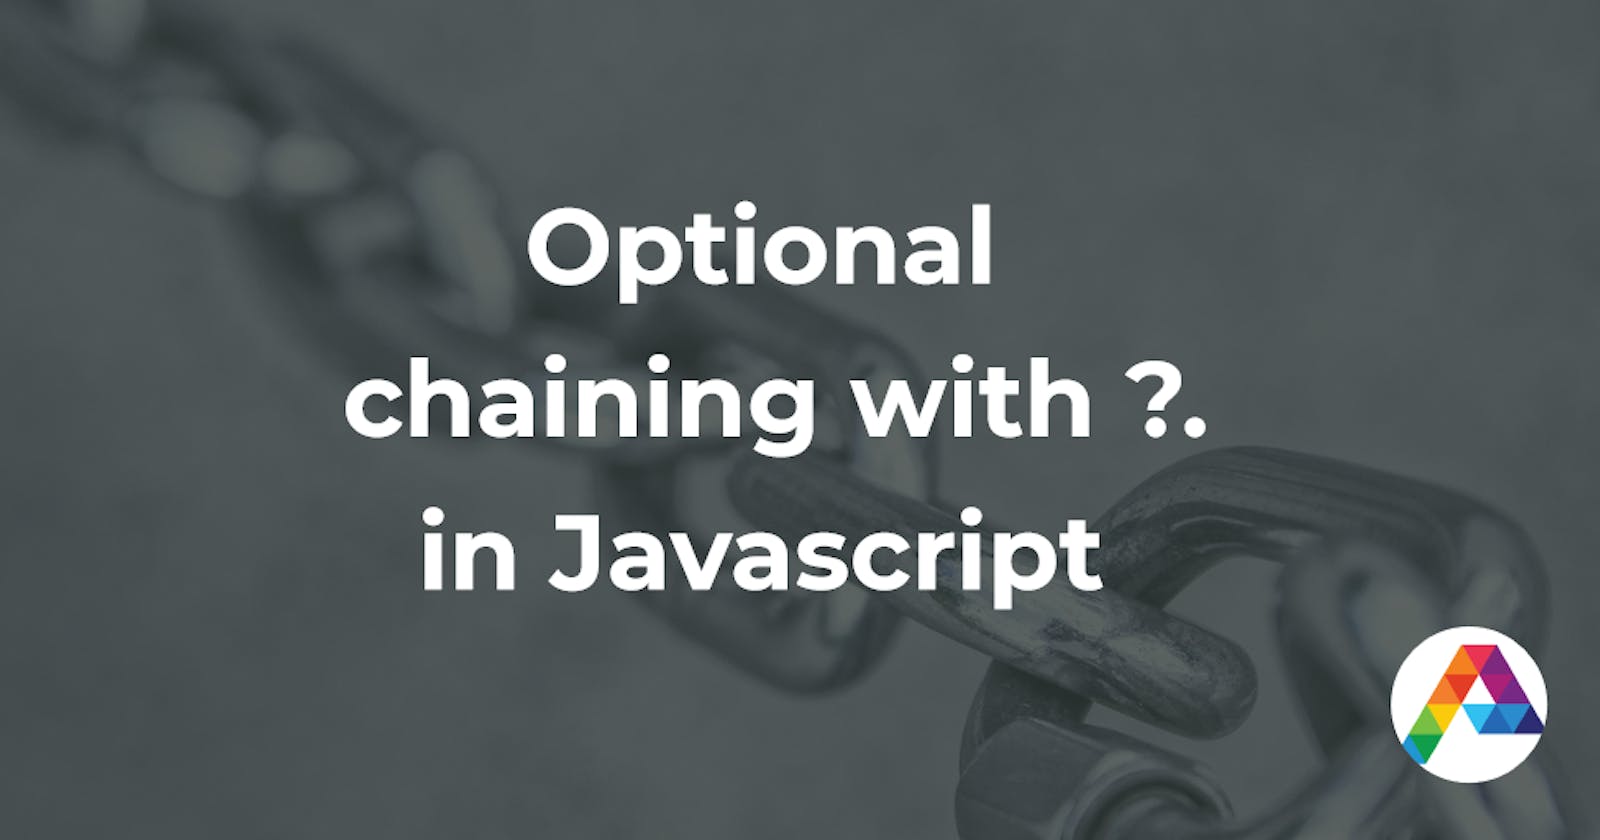 Optional chaining with ?. in Javascript